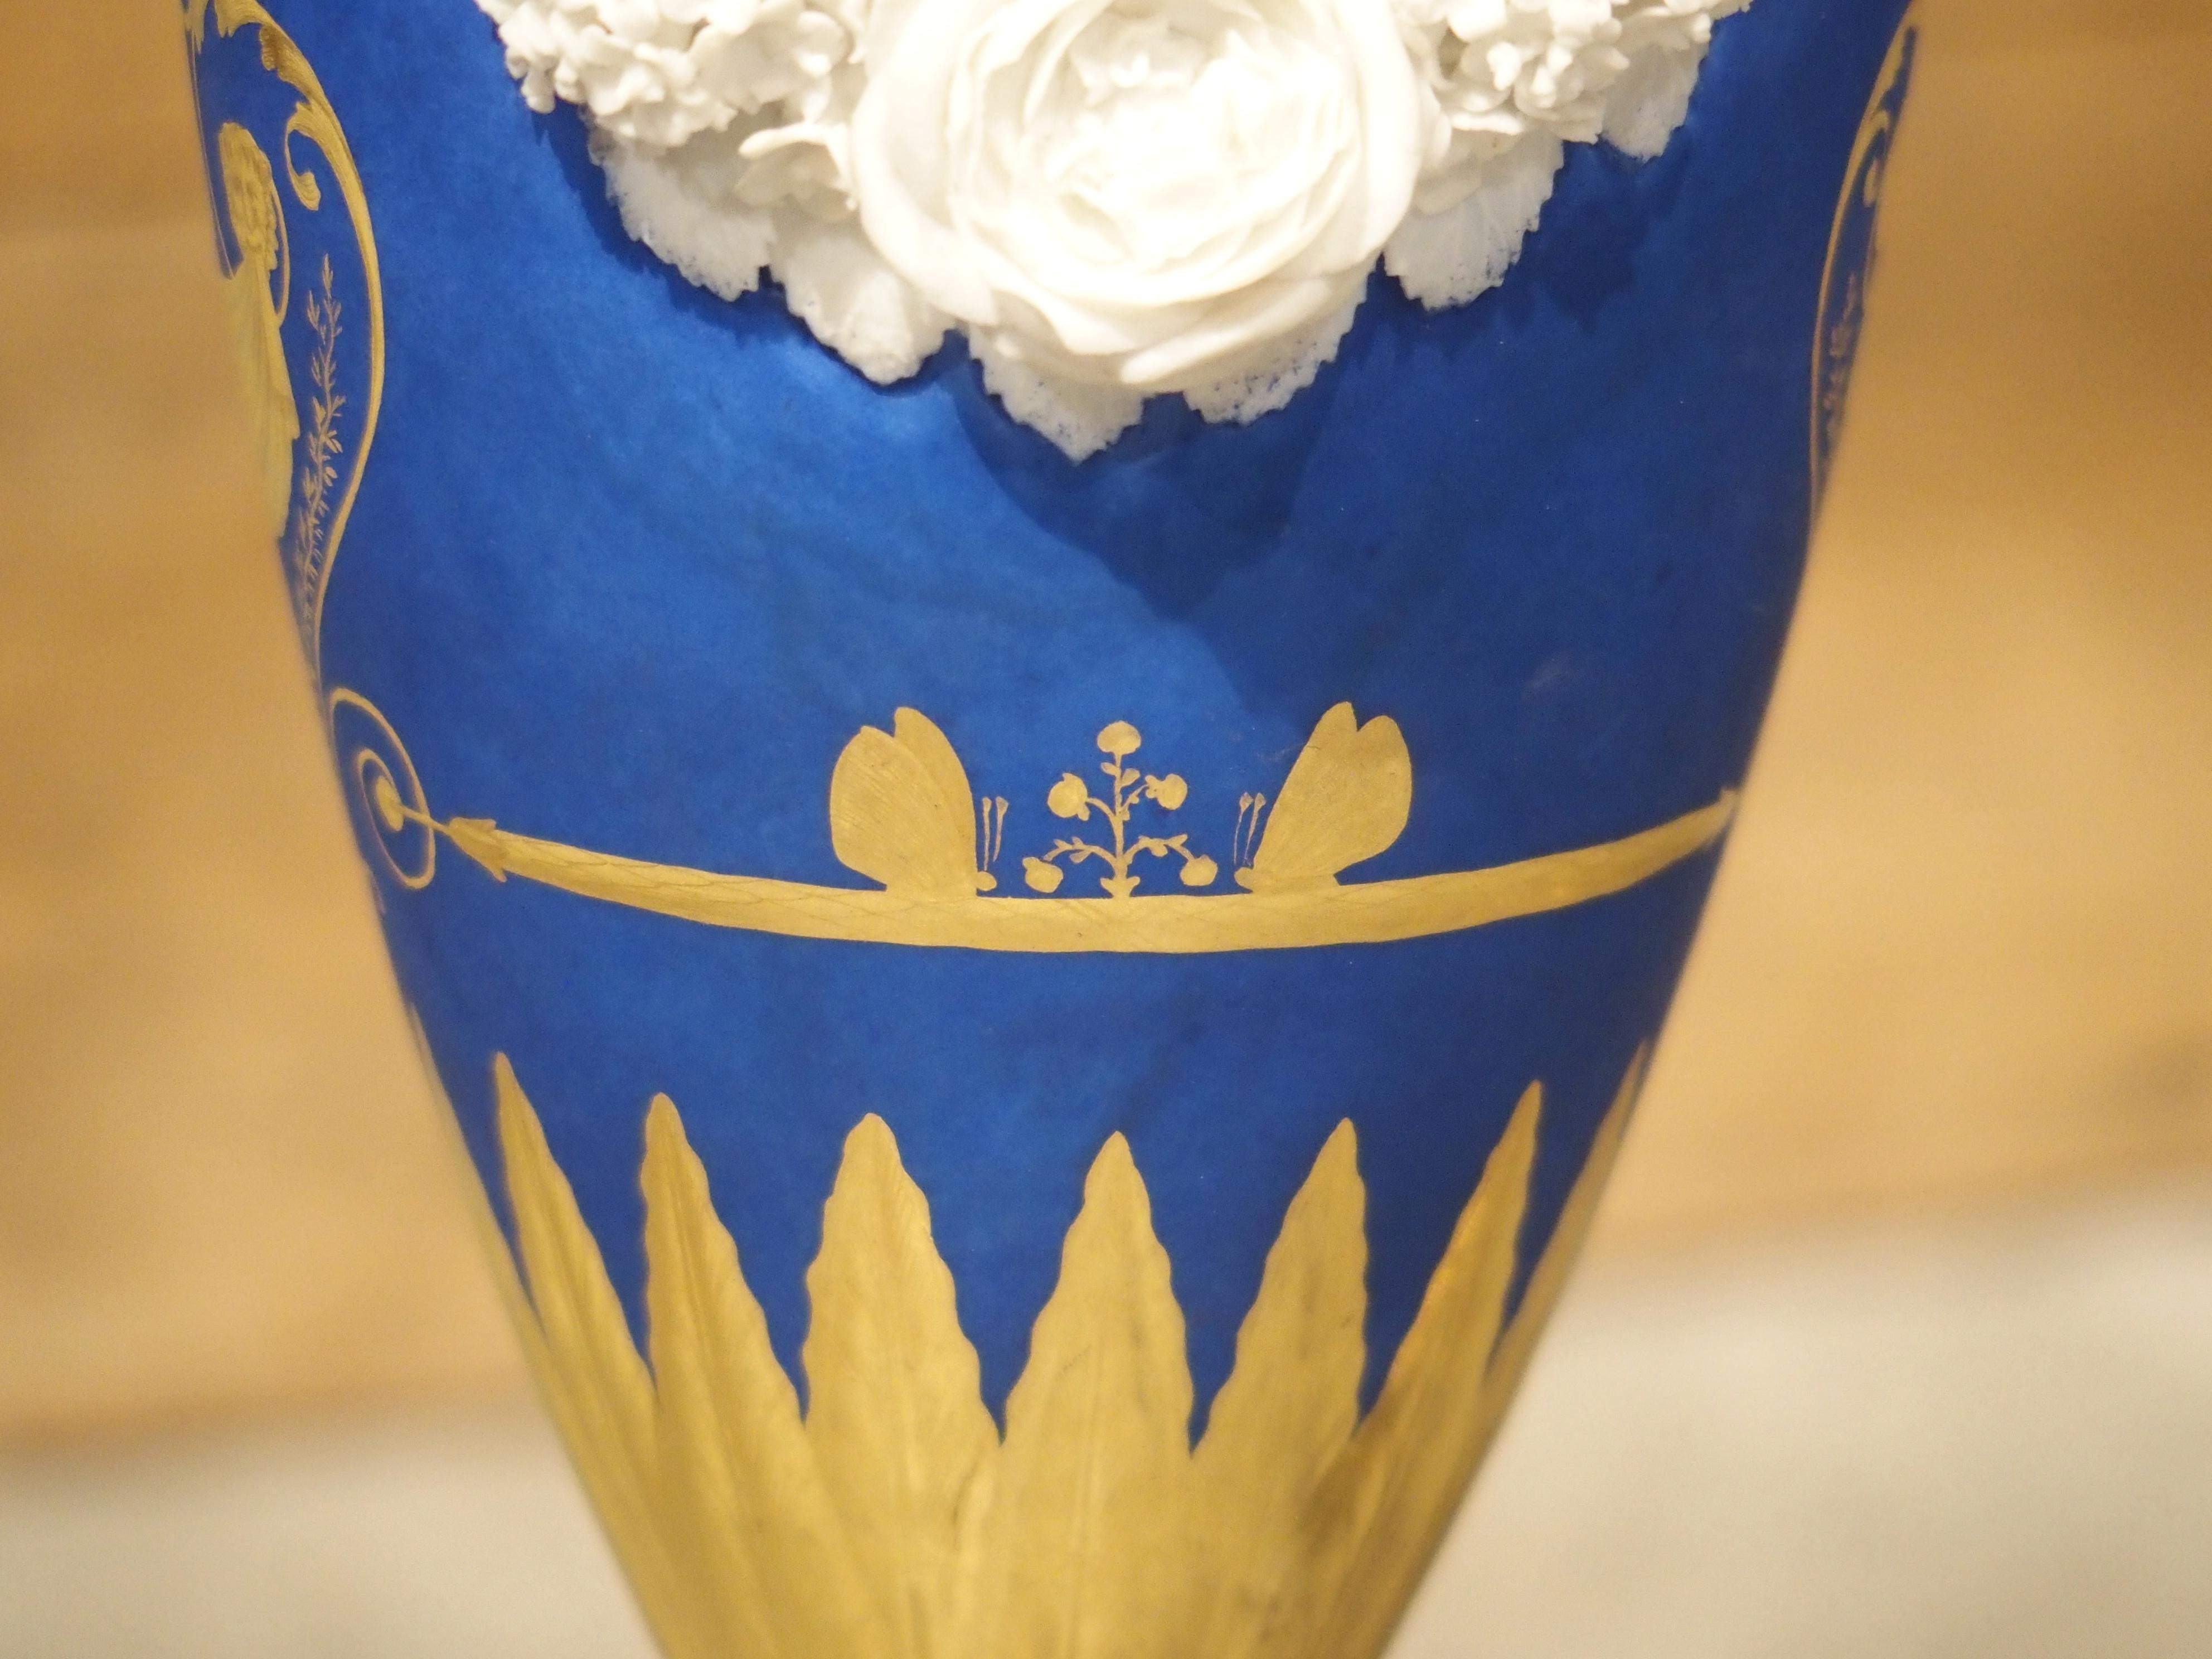 19th Century Pair of Neoclassical Paris Porcelain Vases in Royal French Blue, Early 1800s